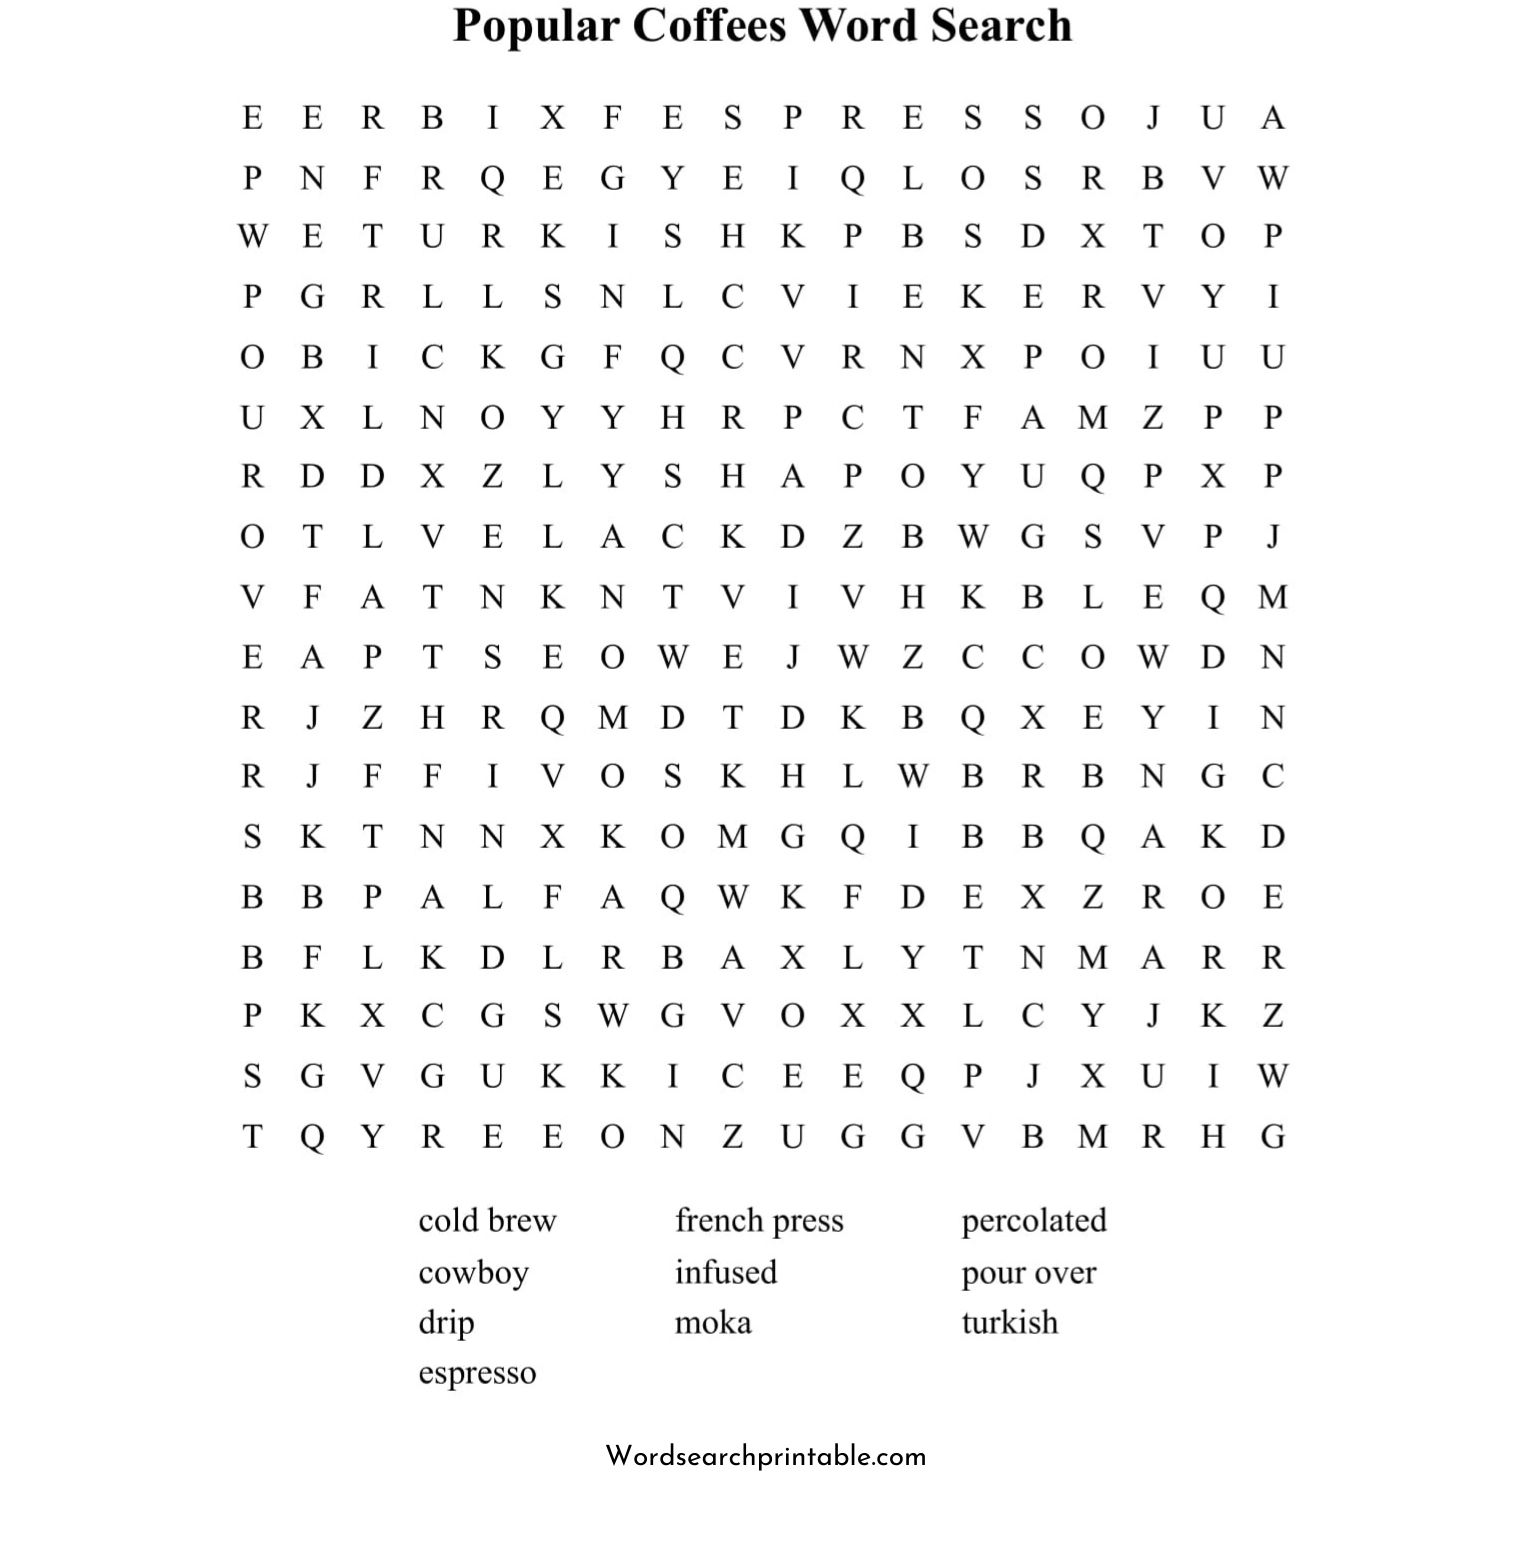 popular coffees word search puzzle